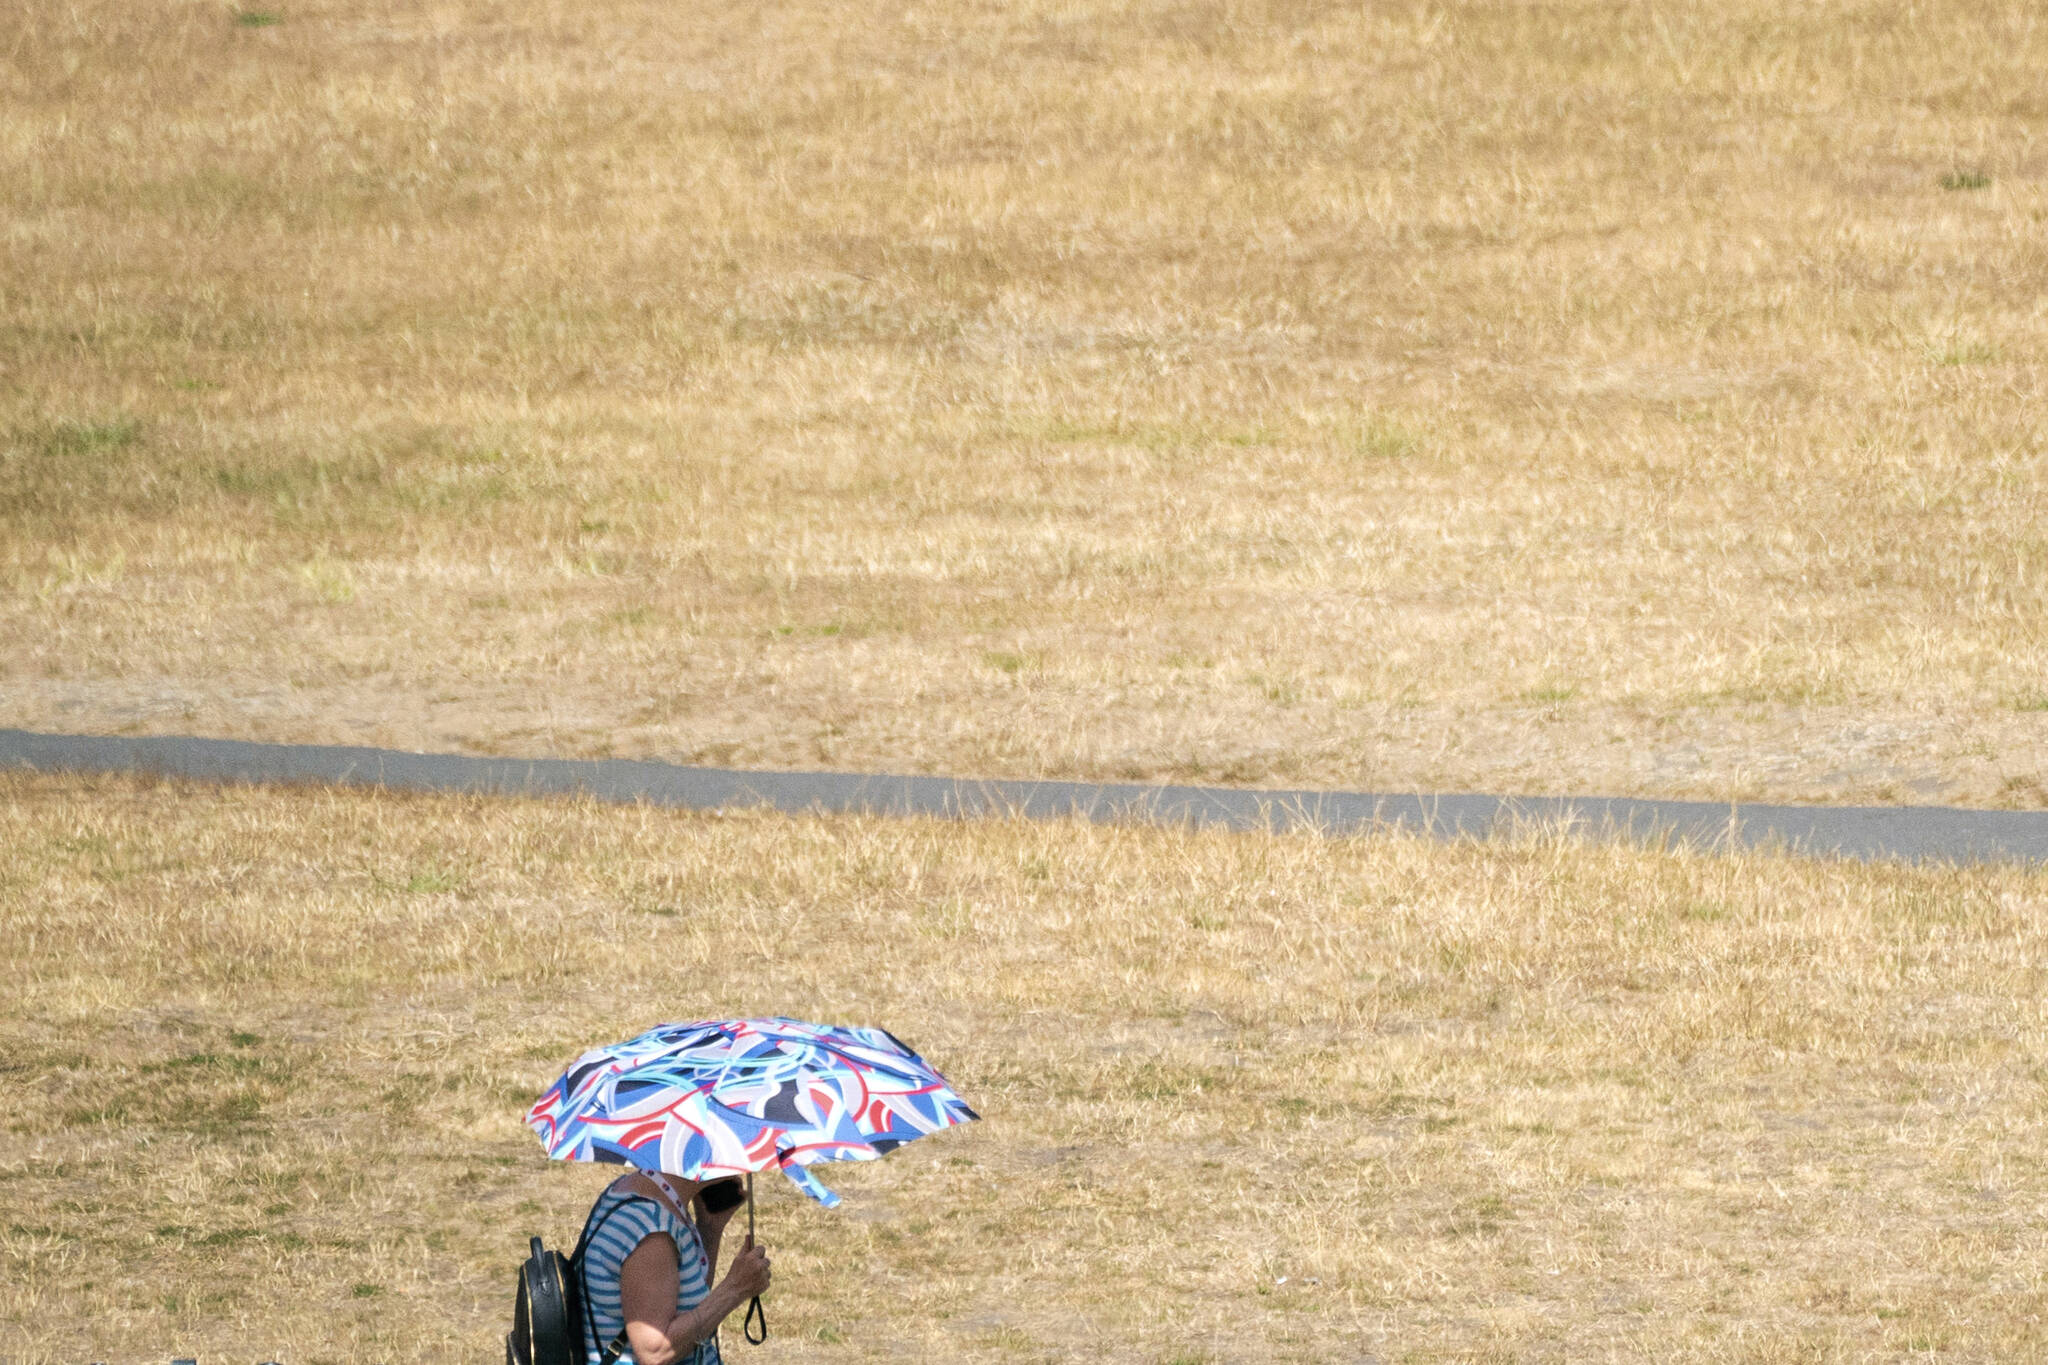 A woman uses an umbrella to shade herself from the sun in Greenwich Park, south east London, Monday July 18, 2022. Britainâ€™s first-ever extreme heat warning is in effect for large parts of England as hot, dry weather that has scorched mainland Europe for the past week moves north, disrupting travel, health care and schools. (Dominic Lipinski/PA via AP)